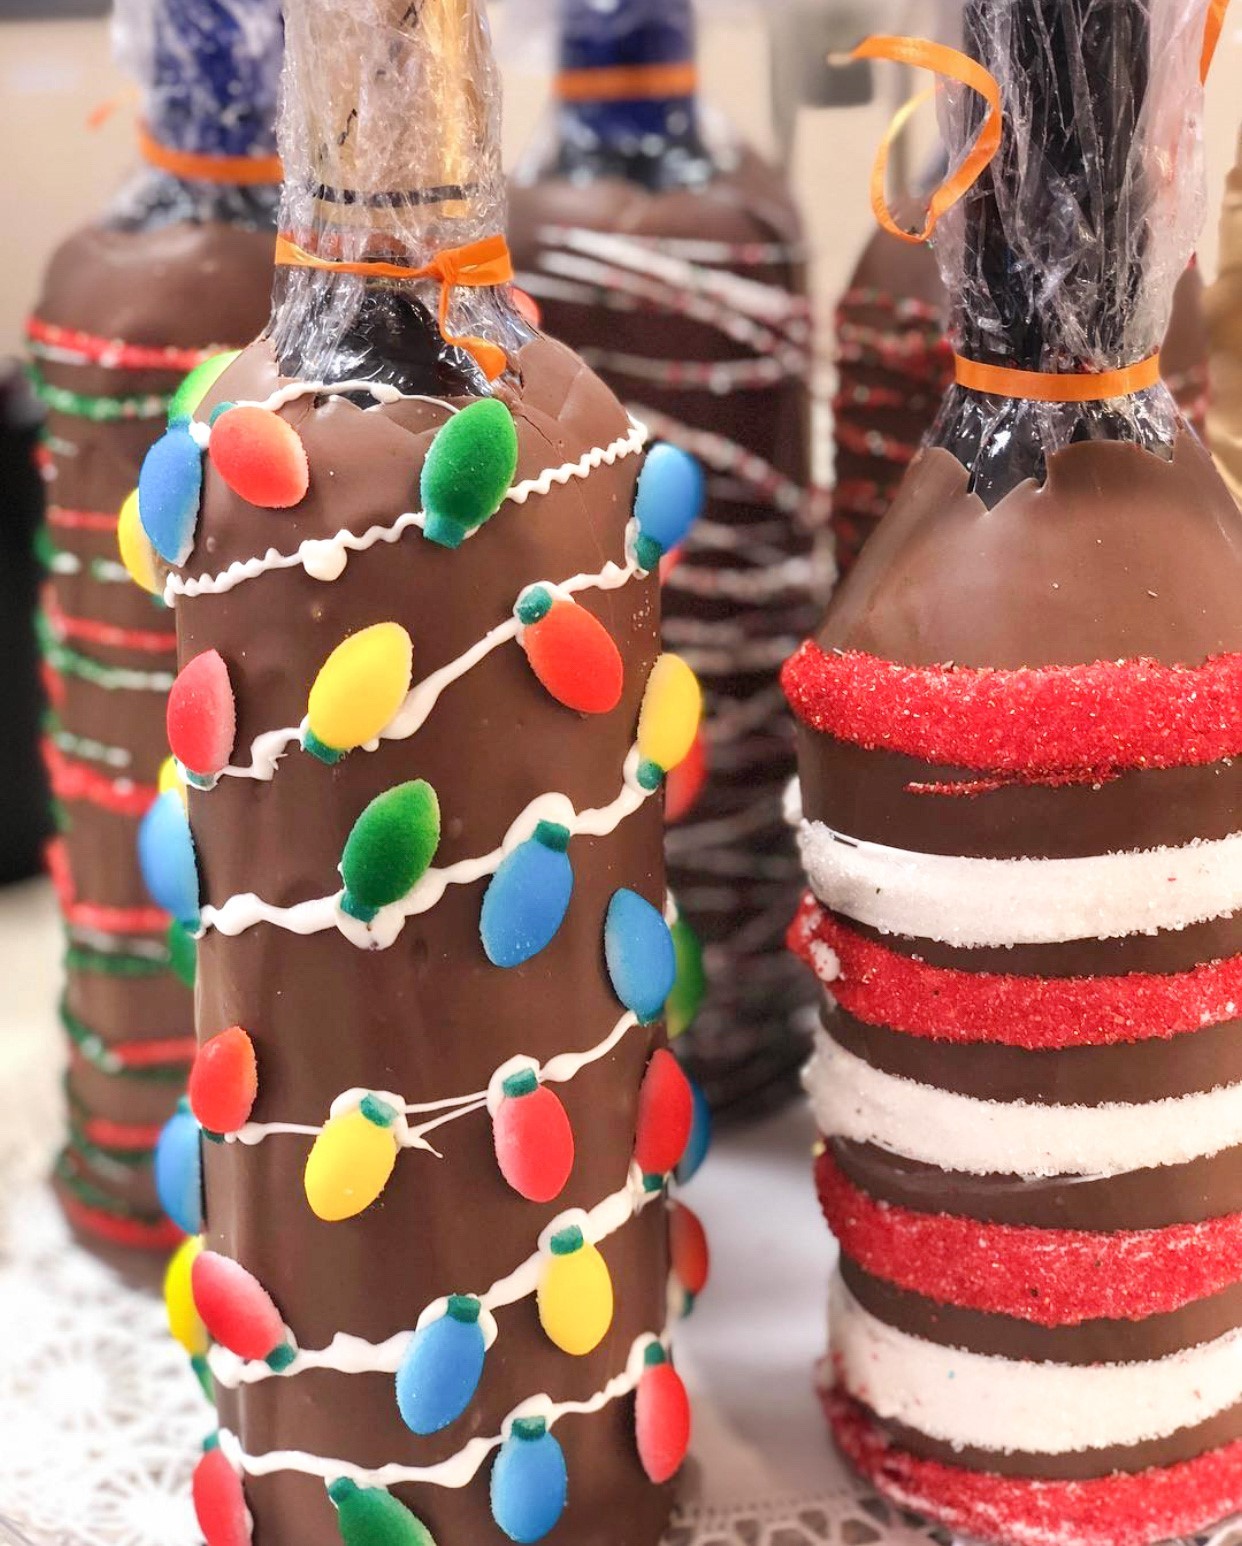 Christmas themed chocolate dipped wine bottles from Jenkinson's Sweet Shop.